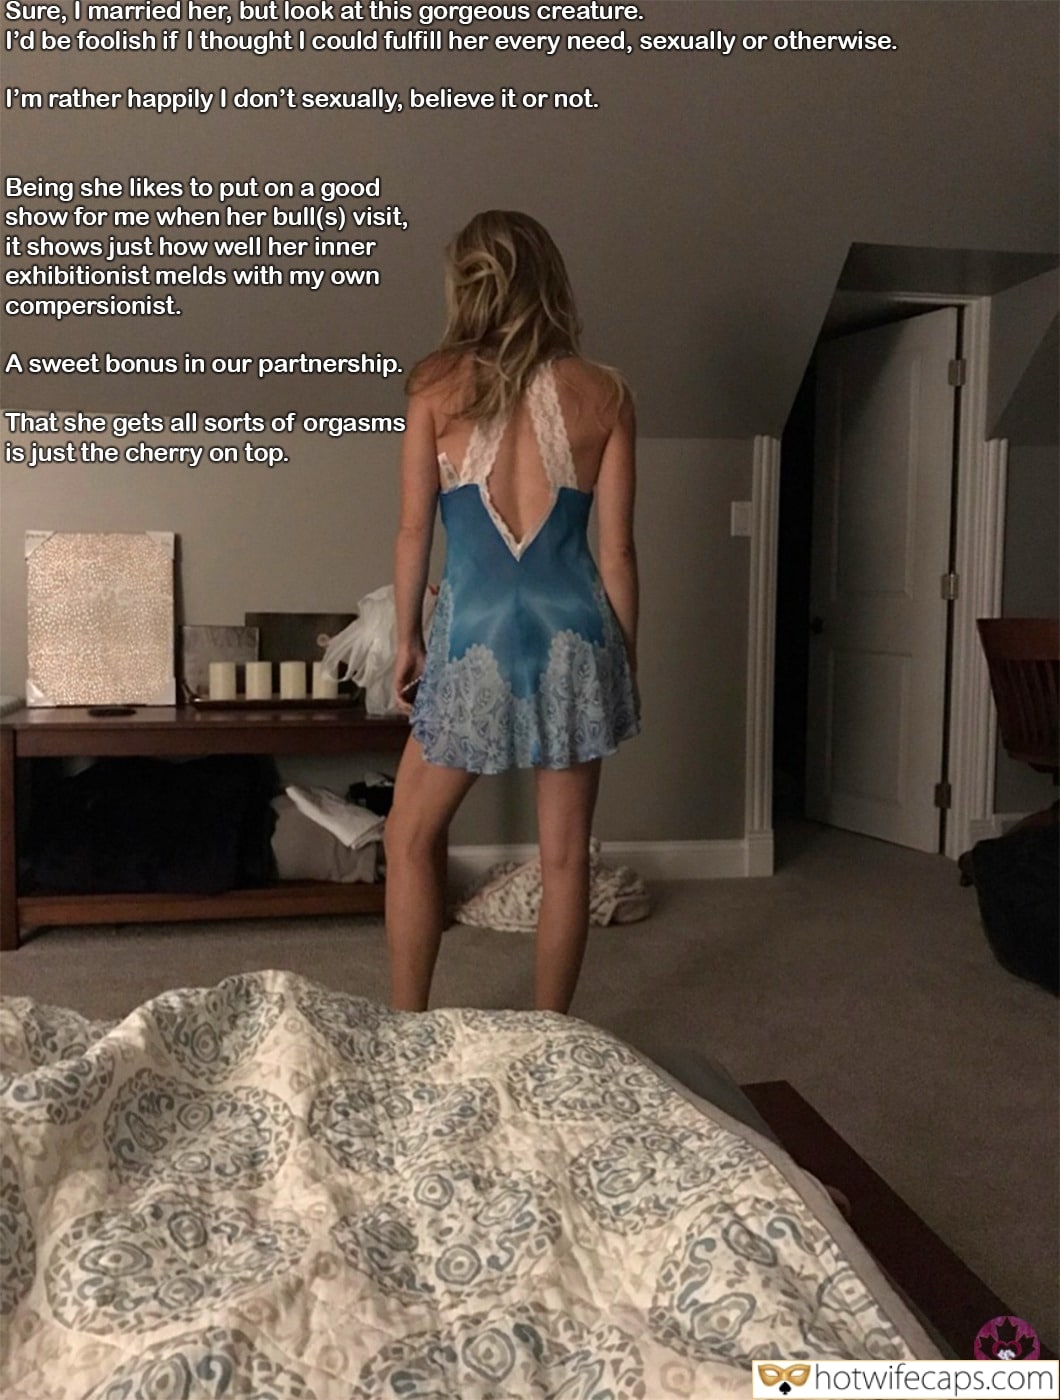 Bull, Bully, Cheating, Cuckold Stories, Sexy Memes Hotwife Caption №565134 home dress for meeting guests photo